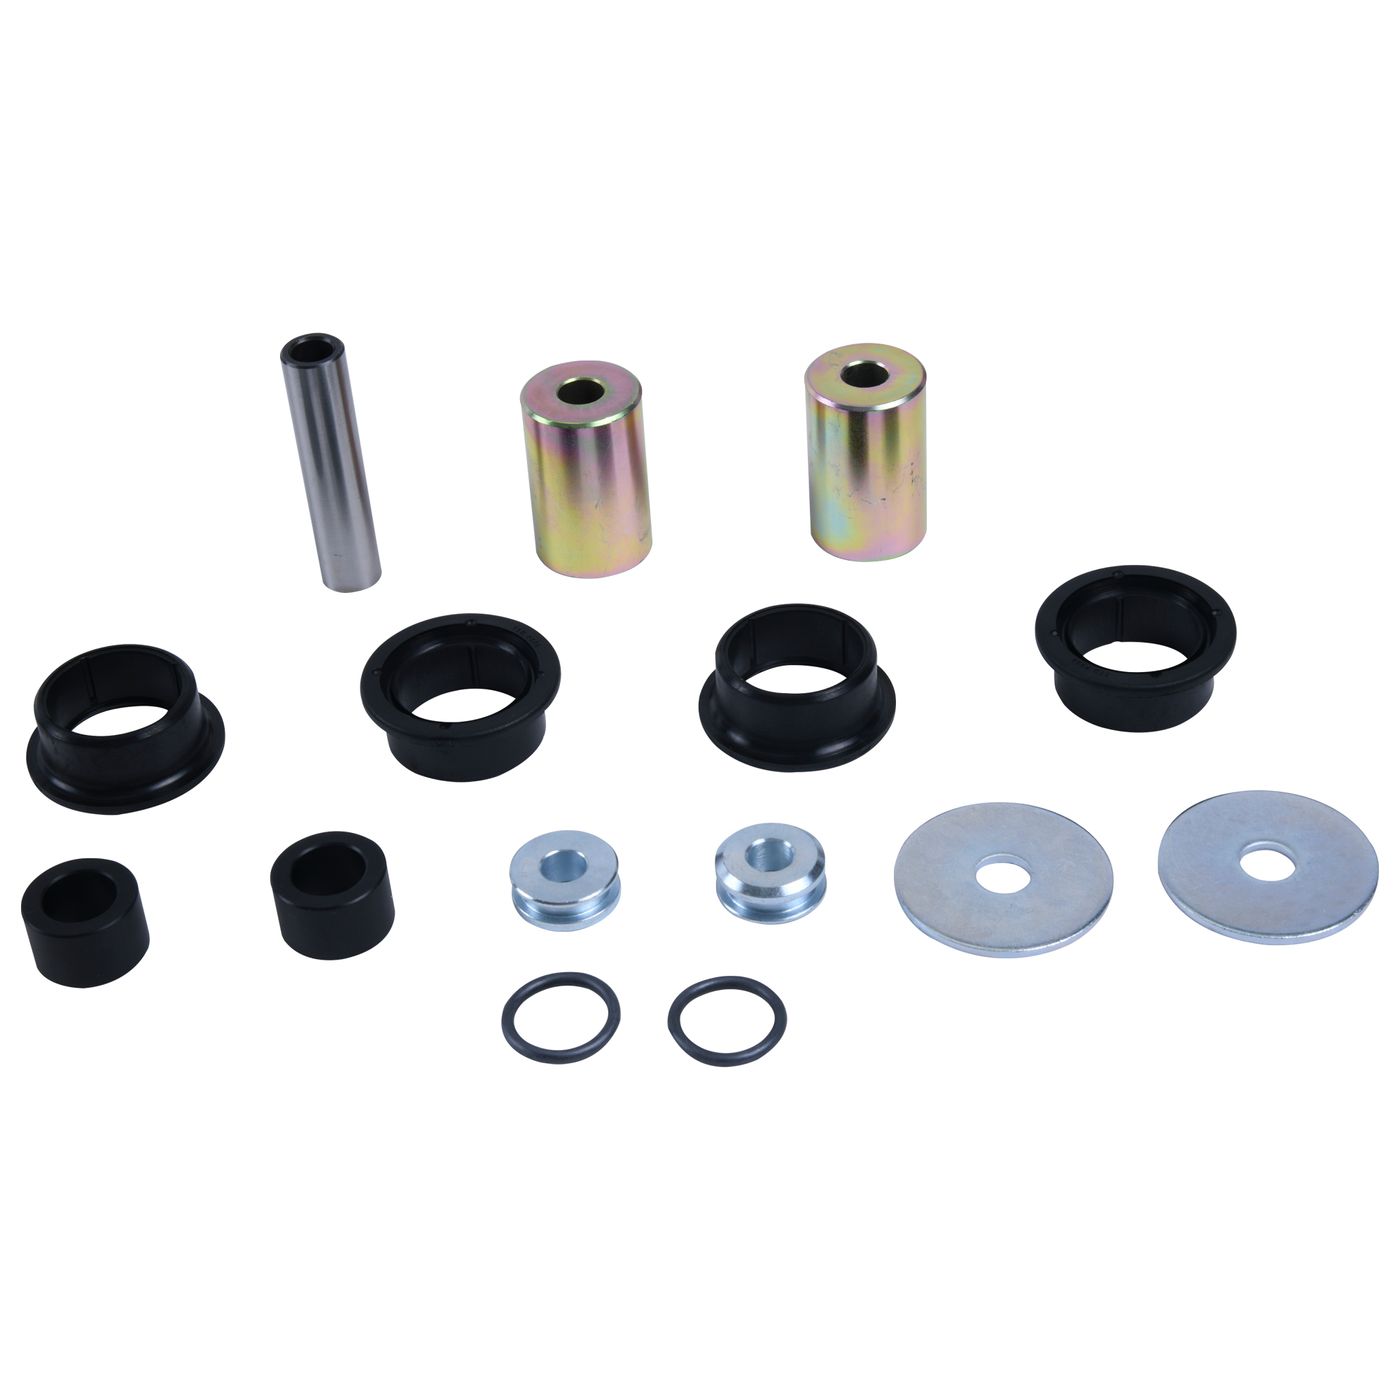 Wrp Rear Ind. Suspension Kits - WRP501238 image